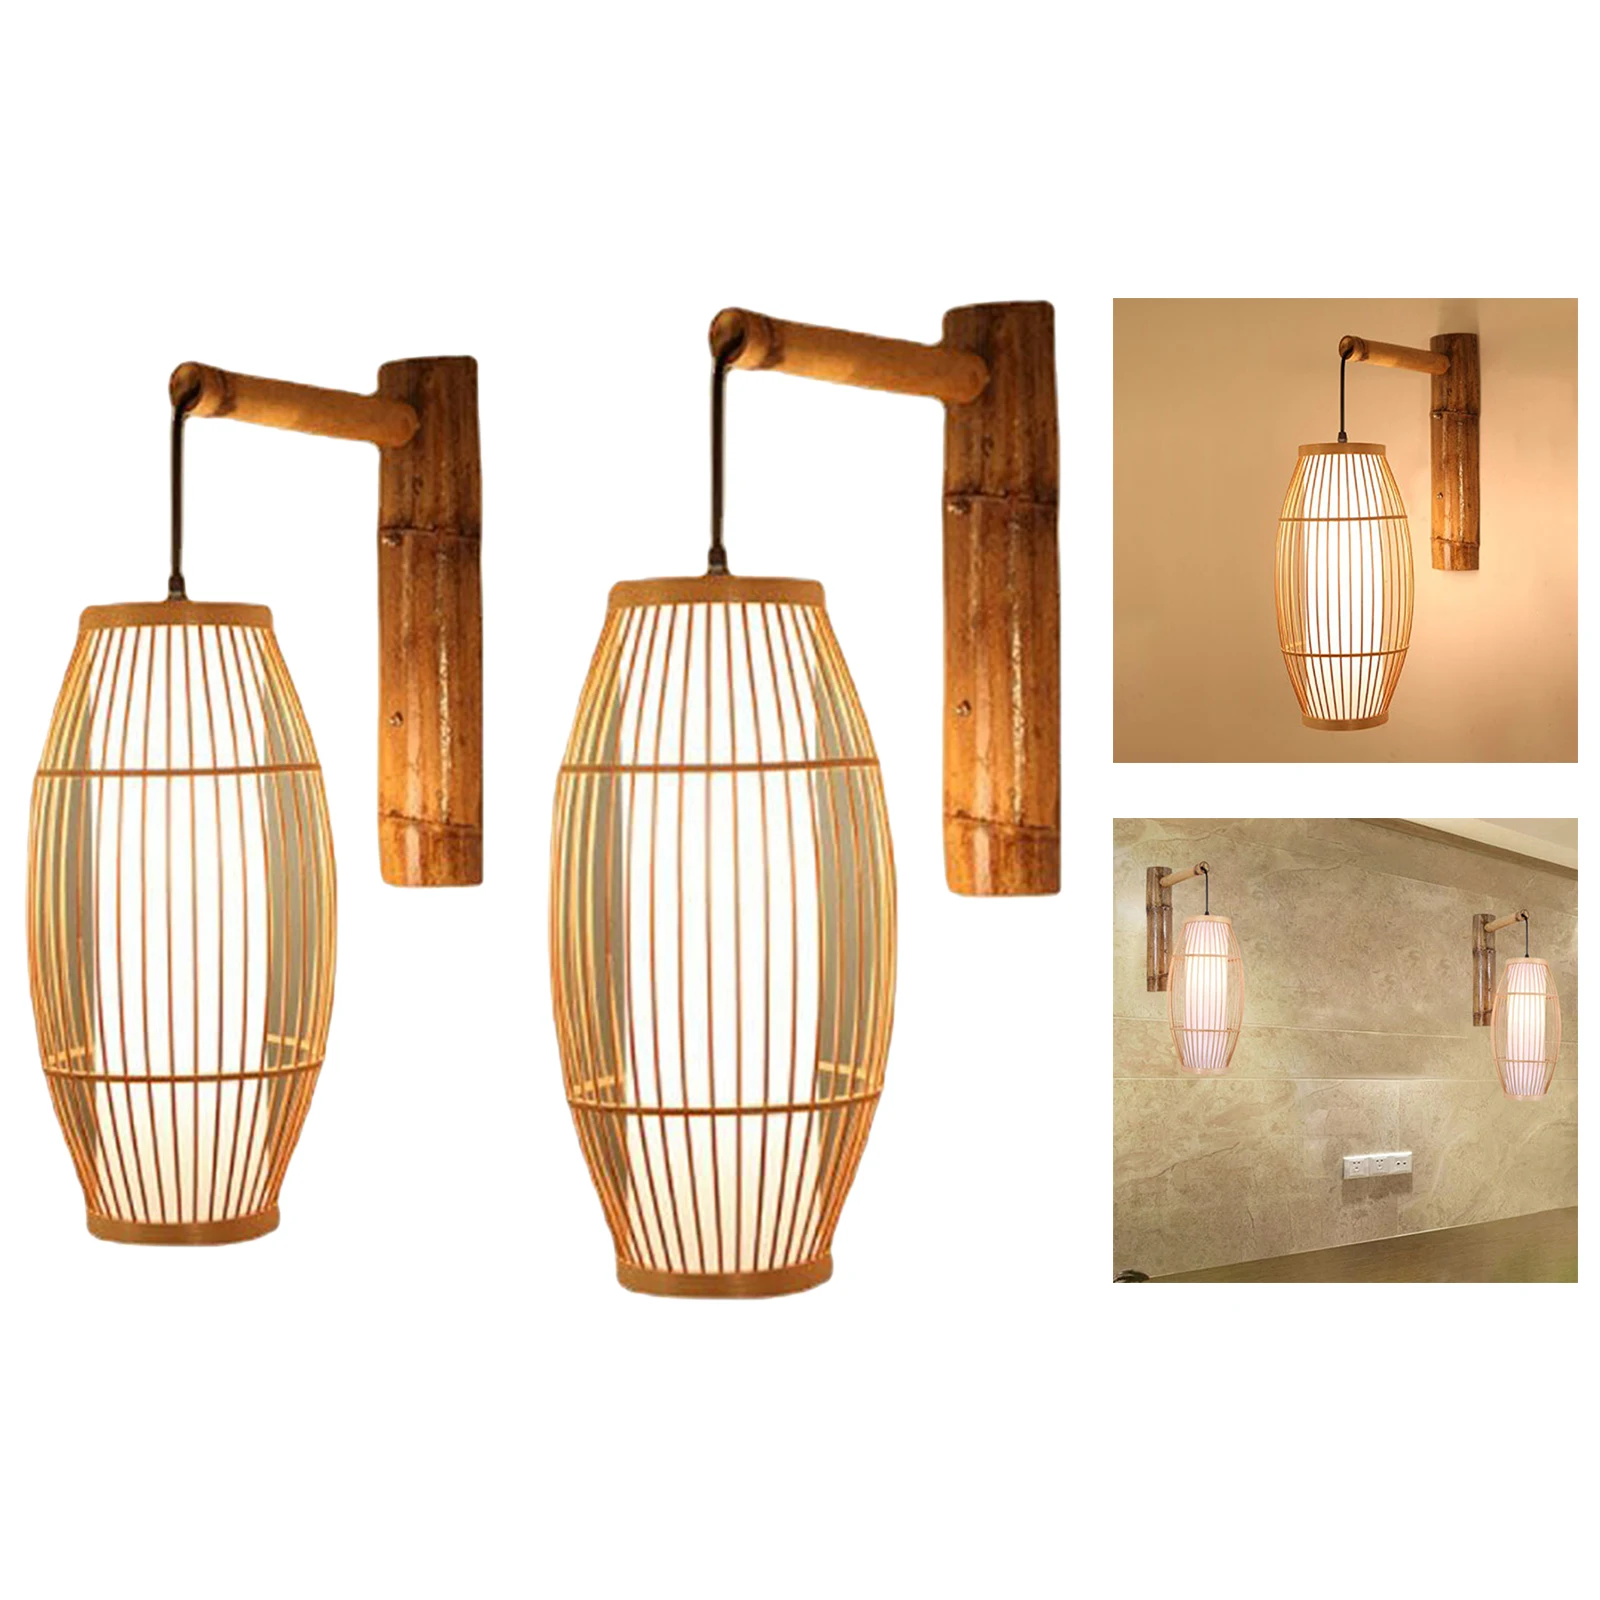 Chinese Style Bamboo Wall Chandelier Decor Weave Decorative Ceiling E27 Wall Pendent Lamp for Tea House Gift Zen